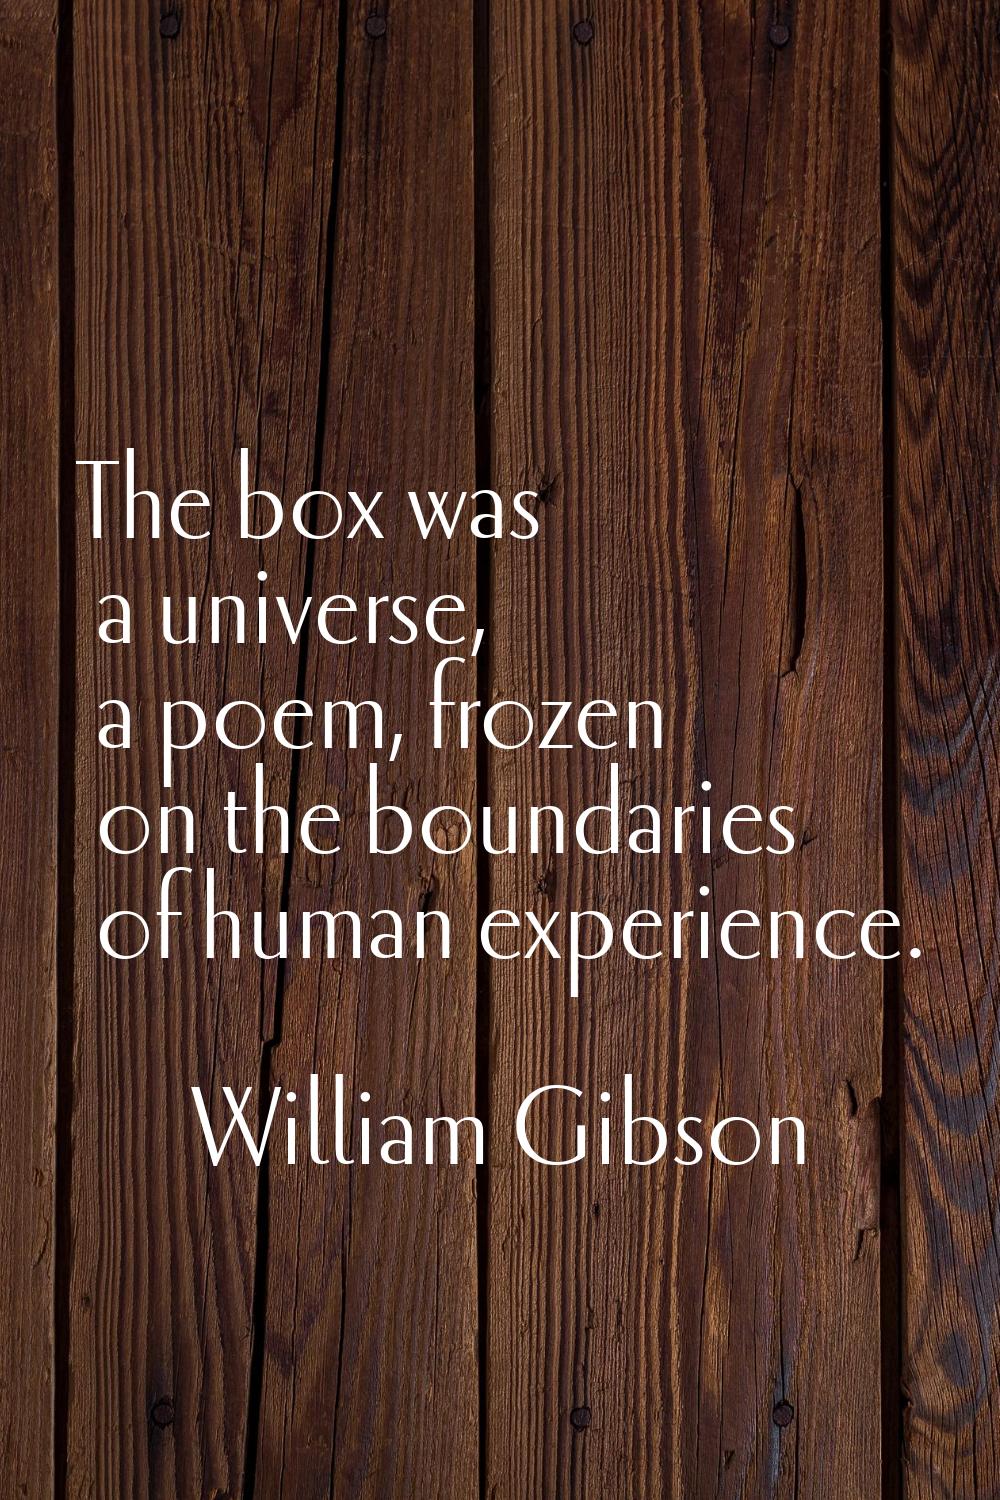 The box was a universe, a poem, frozen on the boundaries of human experience.